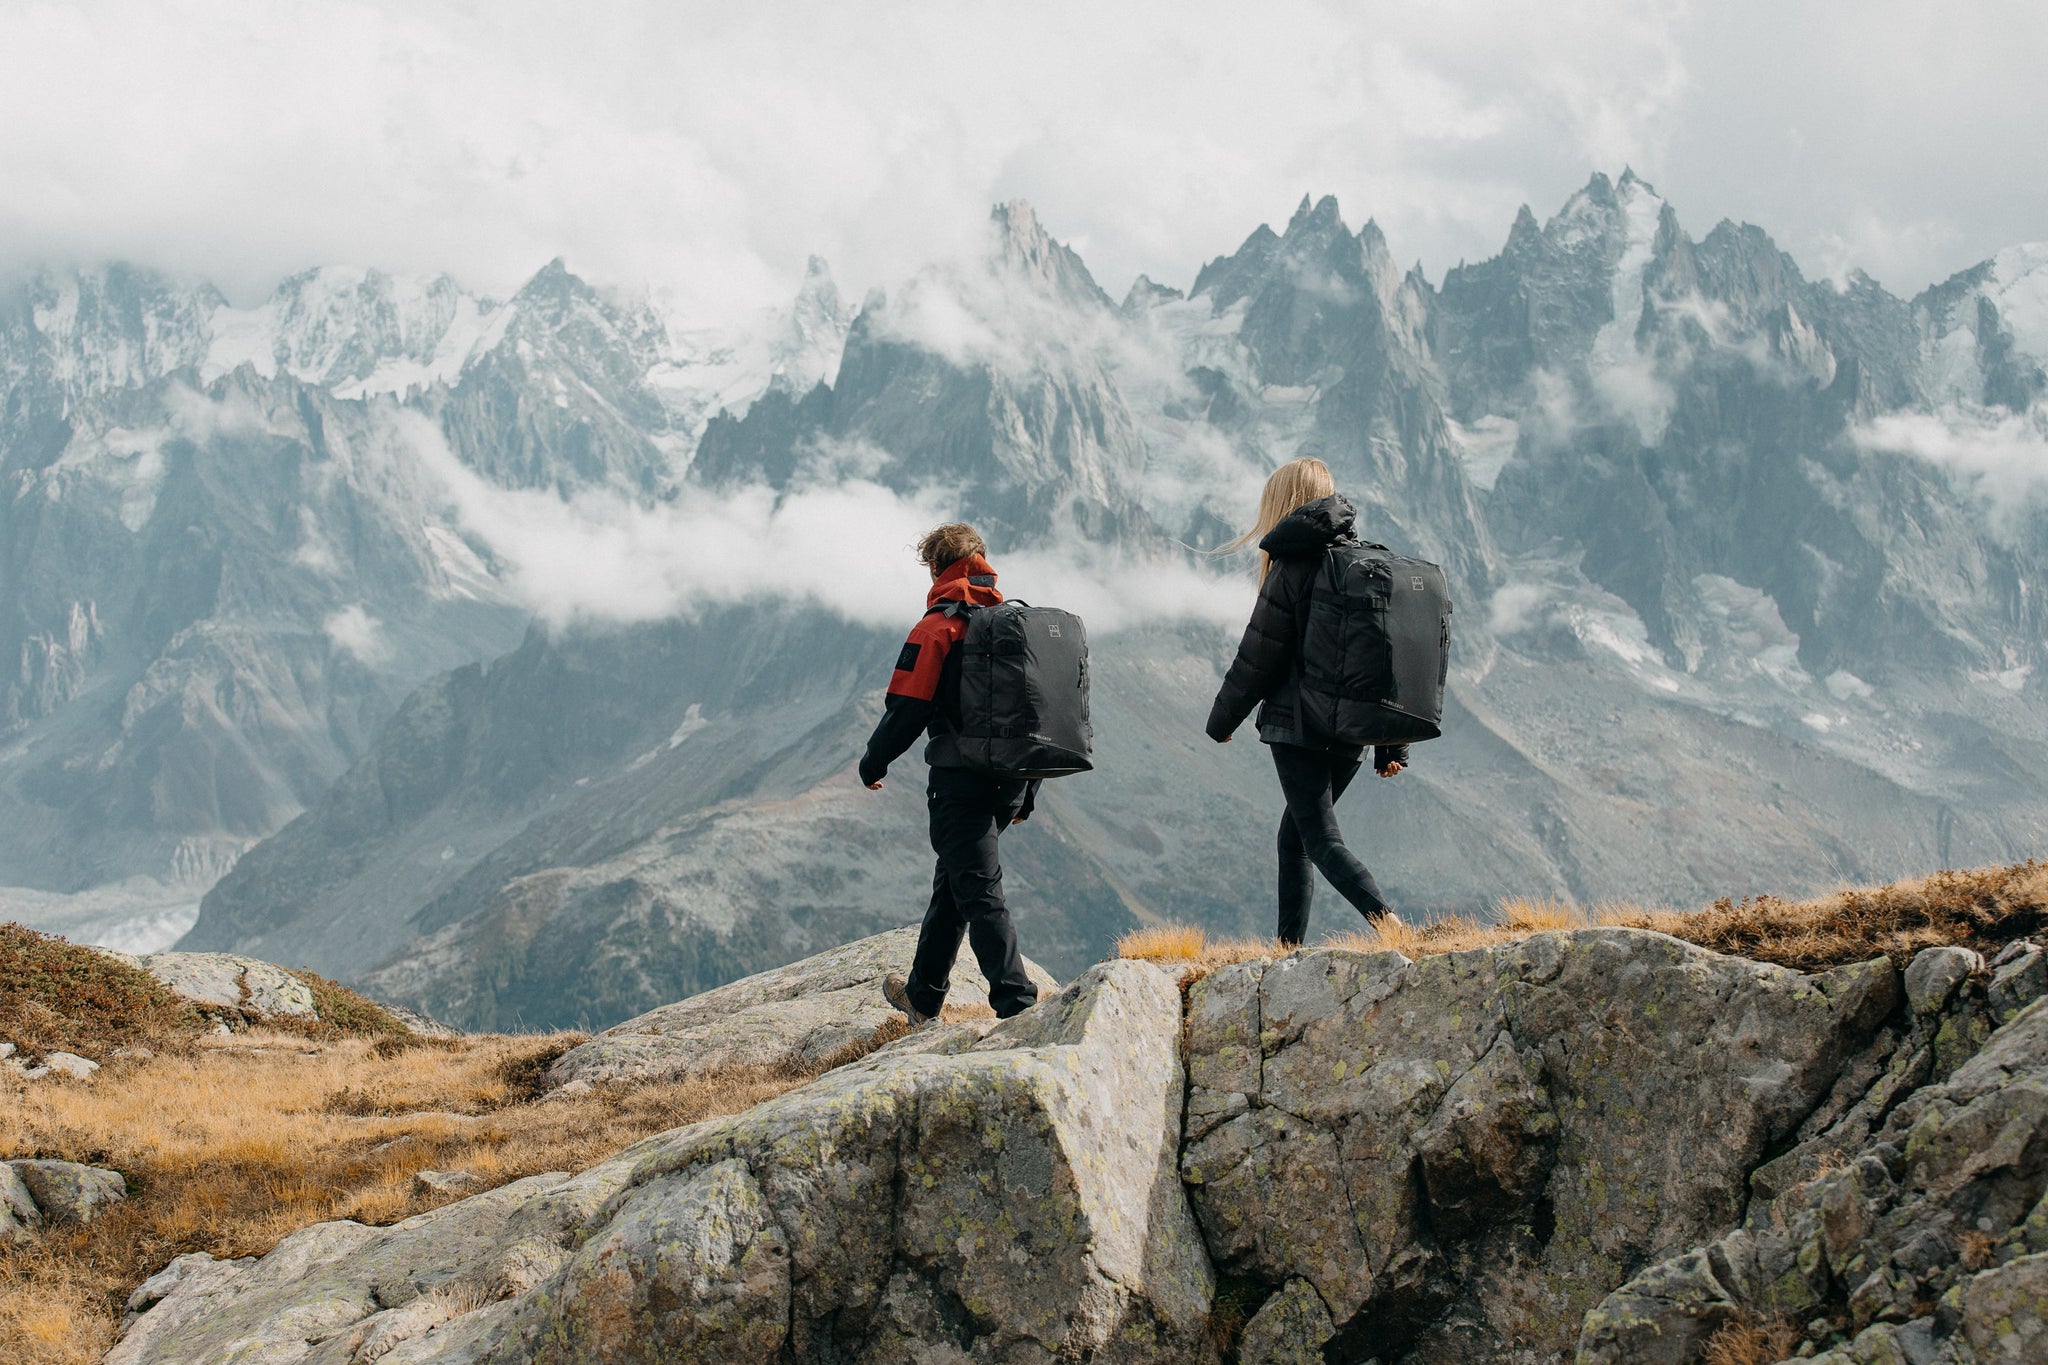 Two people walking on a mountain with outdoor backpacks